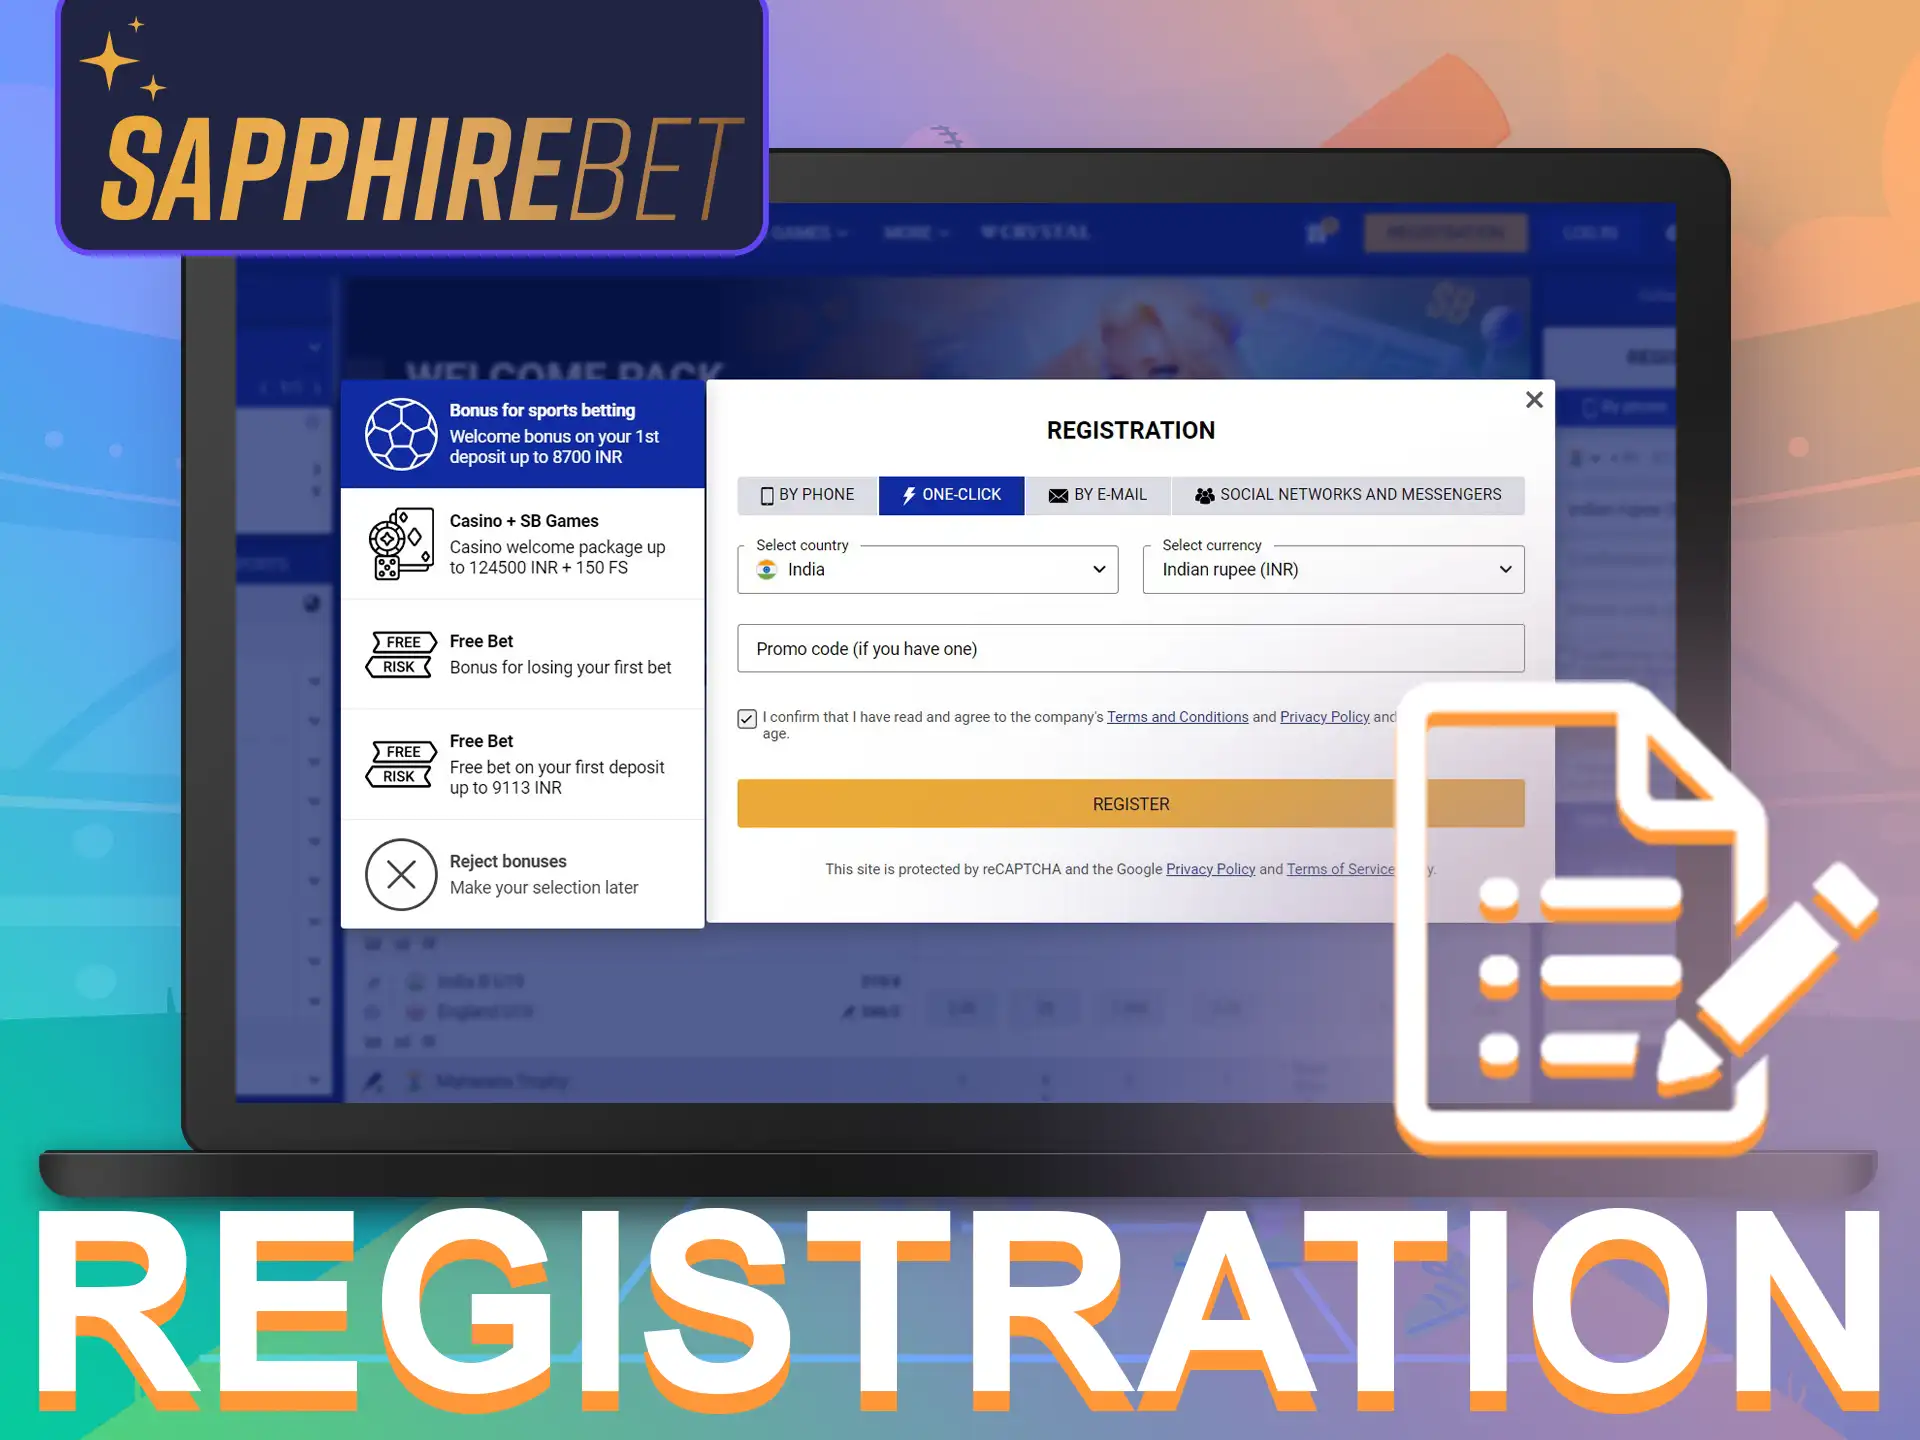 To make your account open the SapphireBet website and register.